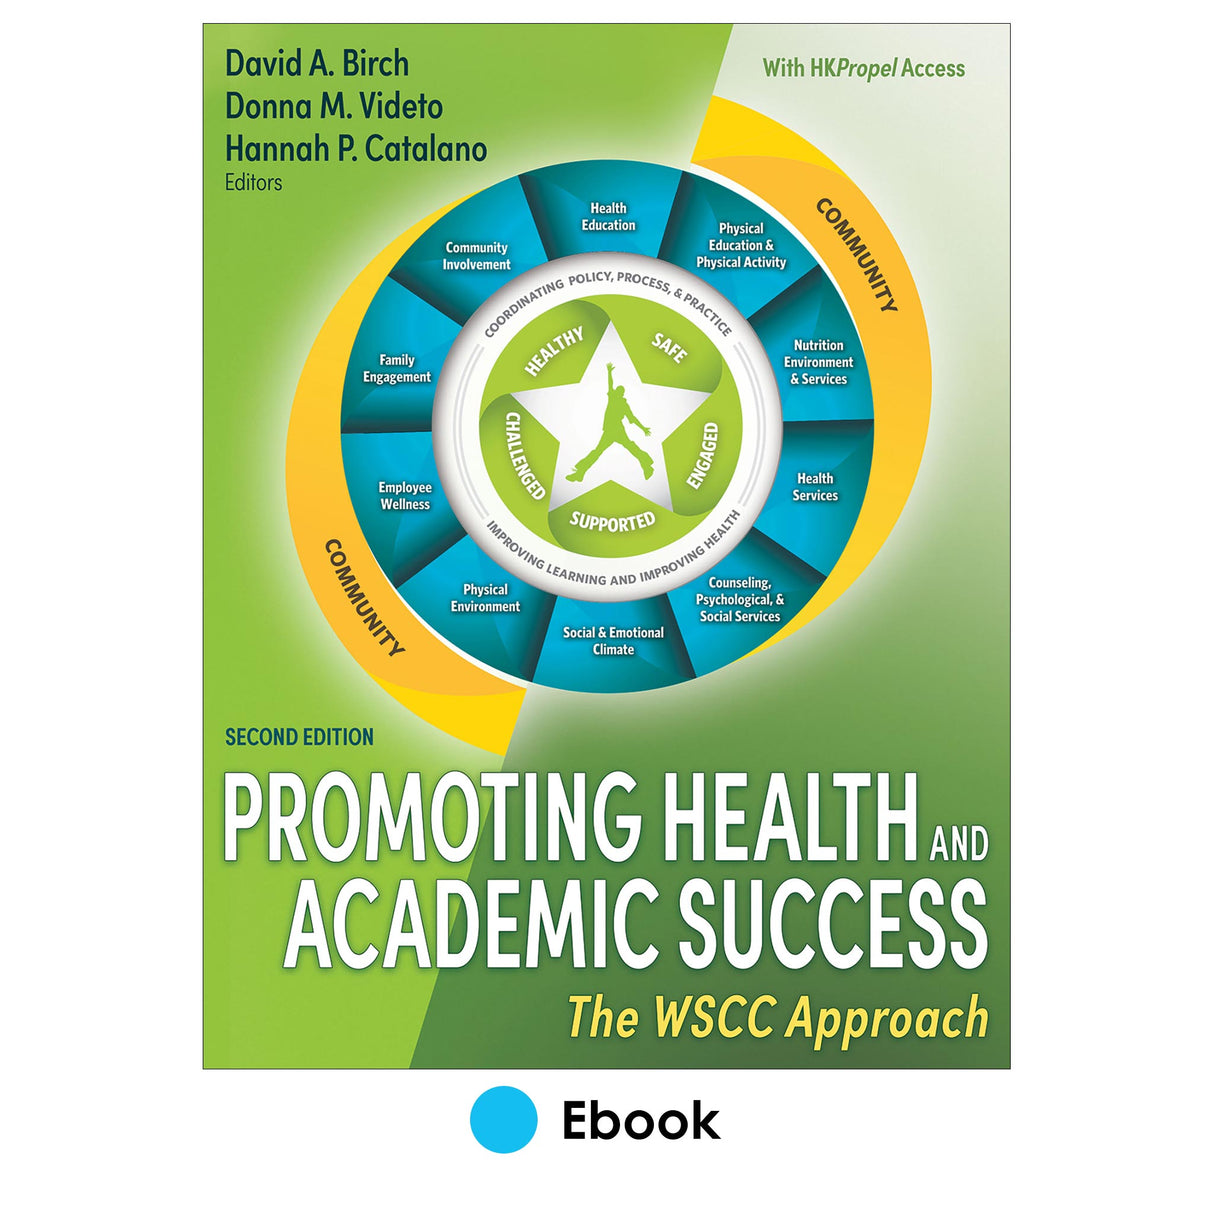 Promoting Health and Academic Success 2nd Edition Ebook With HKPropel Access